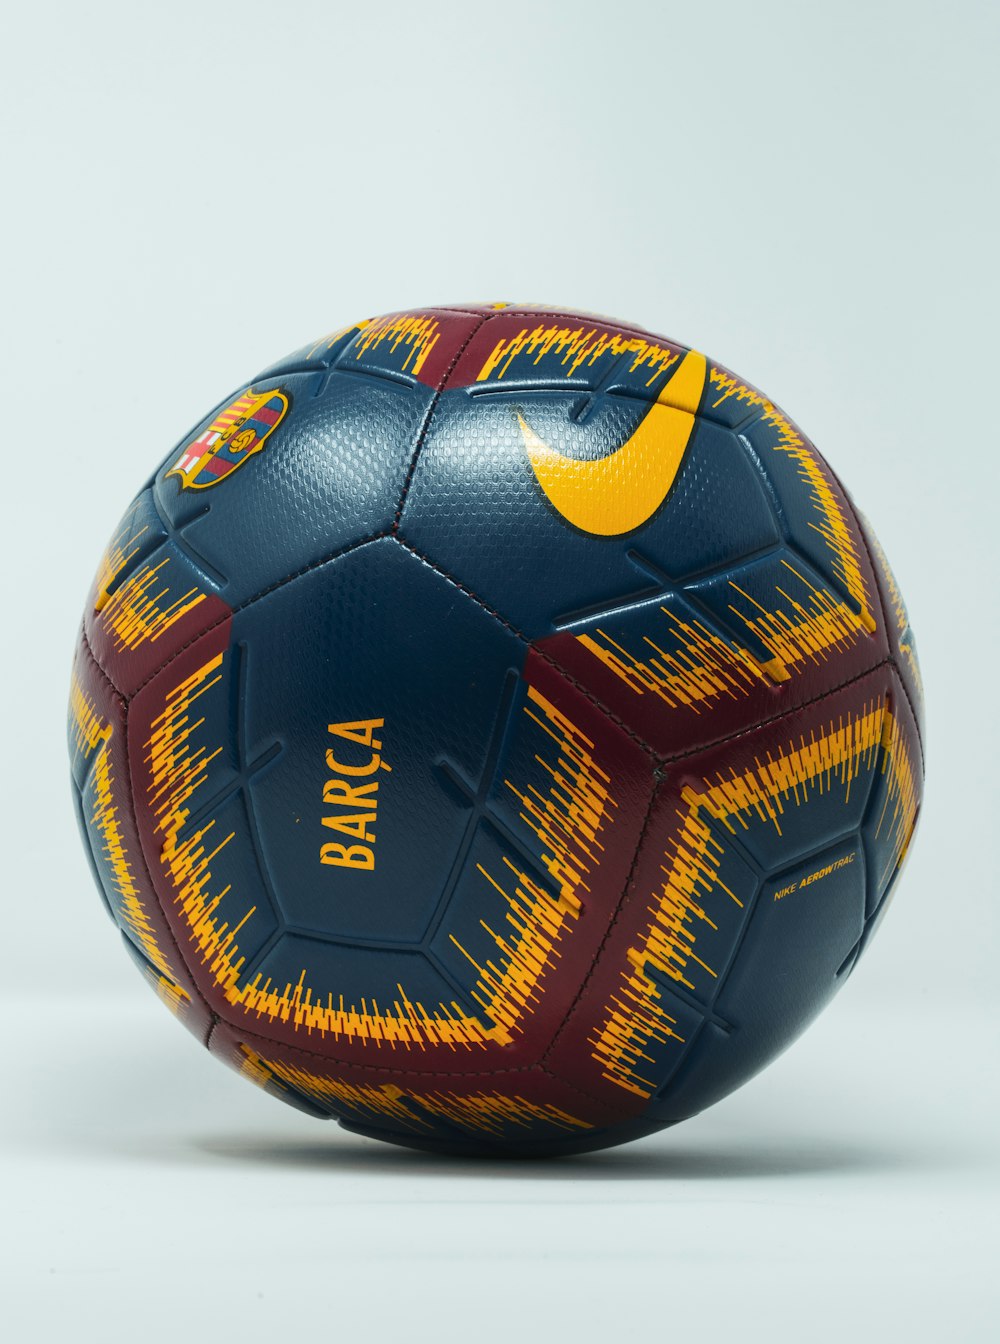 blue, maroon, and yellow Nike soccer ball